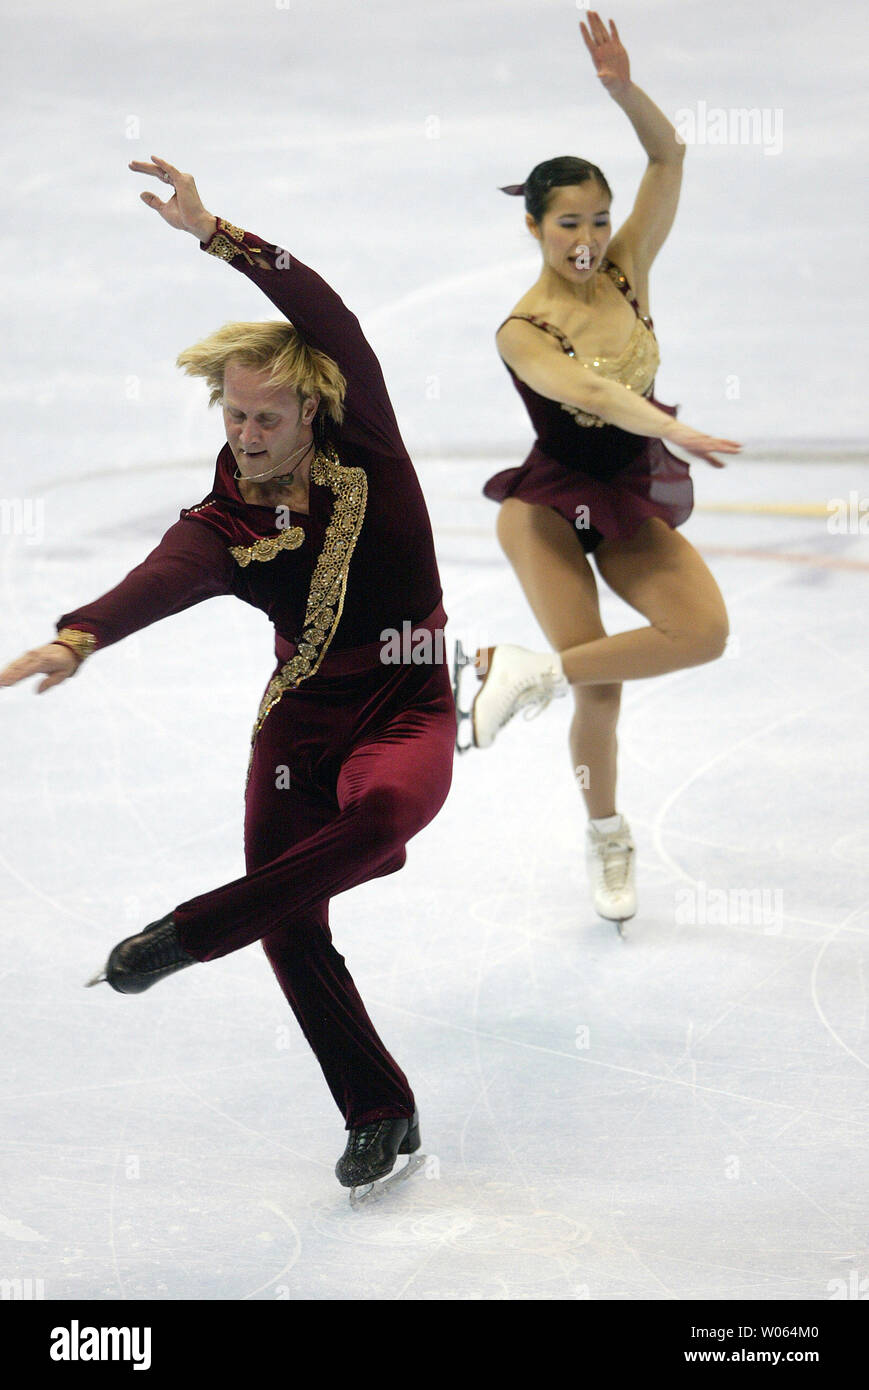 Senior dance skaters Rena Inoque of Hyougo, Japan and her partner John Baldwin of Dallas, perform their routine during the U.S. Figure Skating qualifying event at the Savvis Center in St. Louis on January 13, 2006. (UPI Photo/Bill Greenblatt) Stock Photo